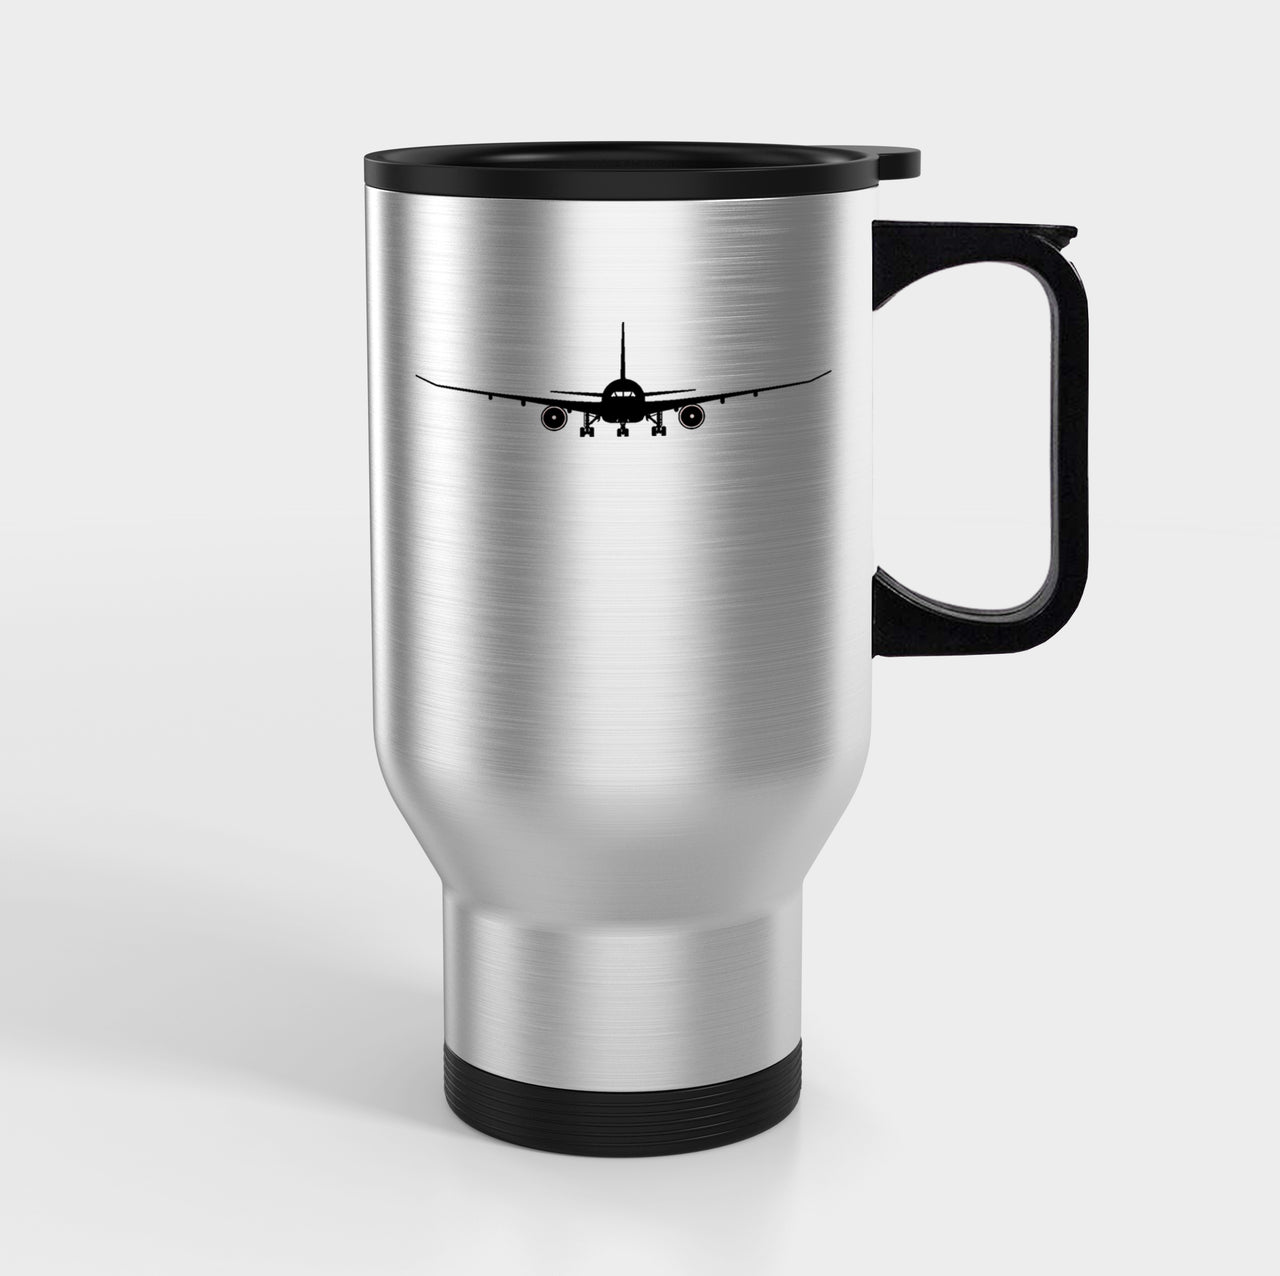 Boeing 787 Silhouette Designed Travel Mugs (With Holder)